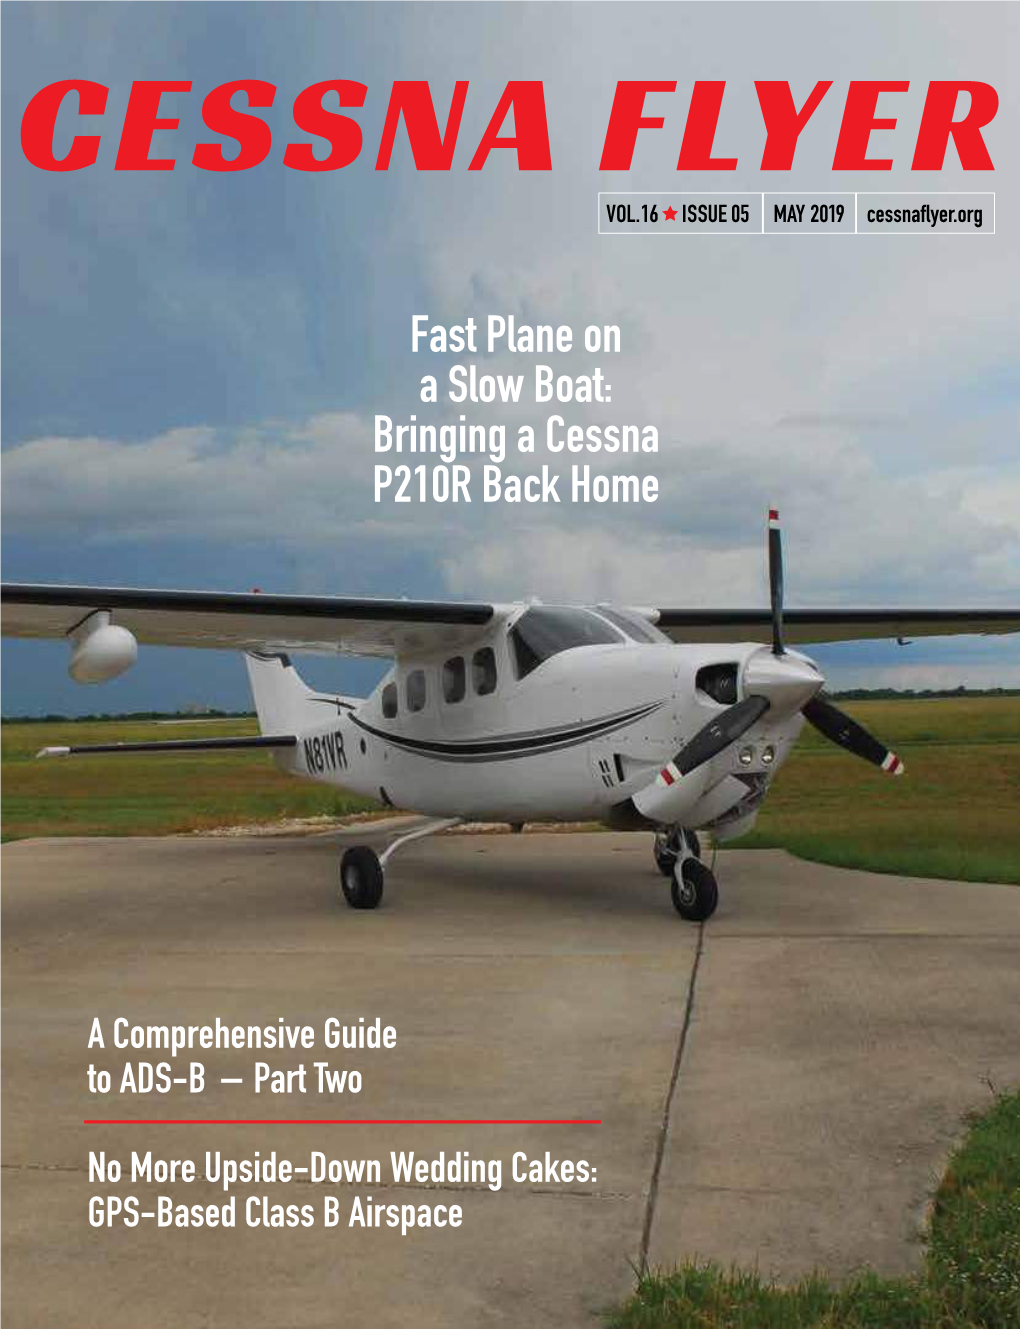 Fast Plane on a Slow Boat: Bringing a Cessna P210R Back Home